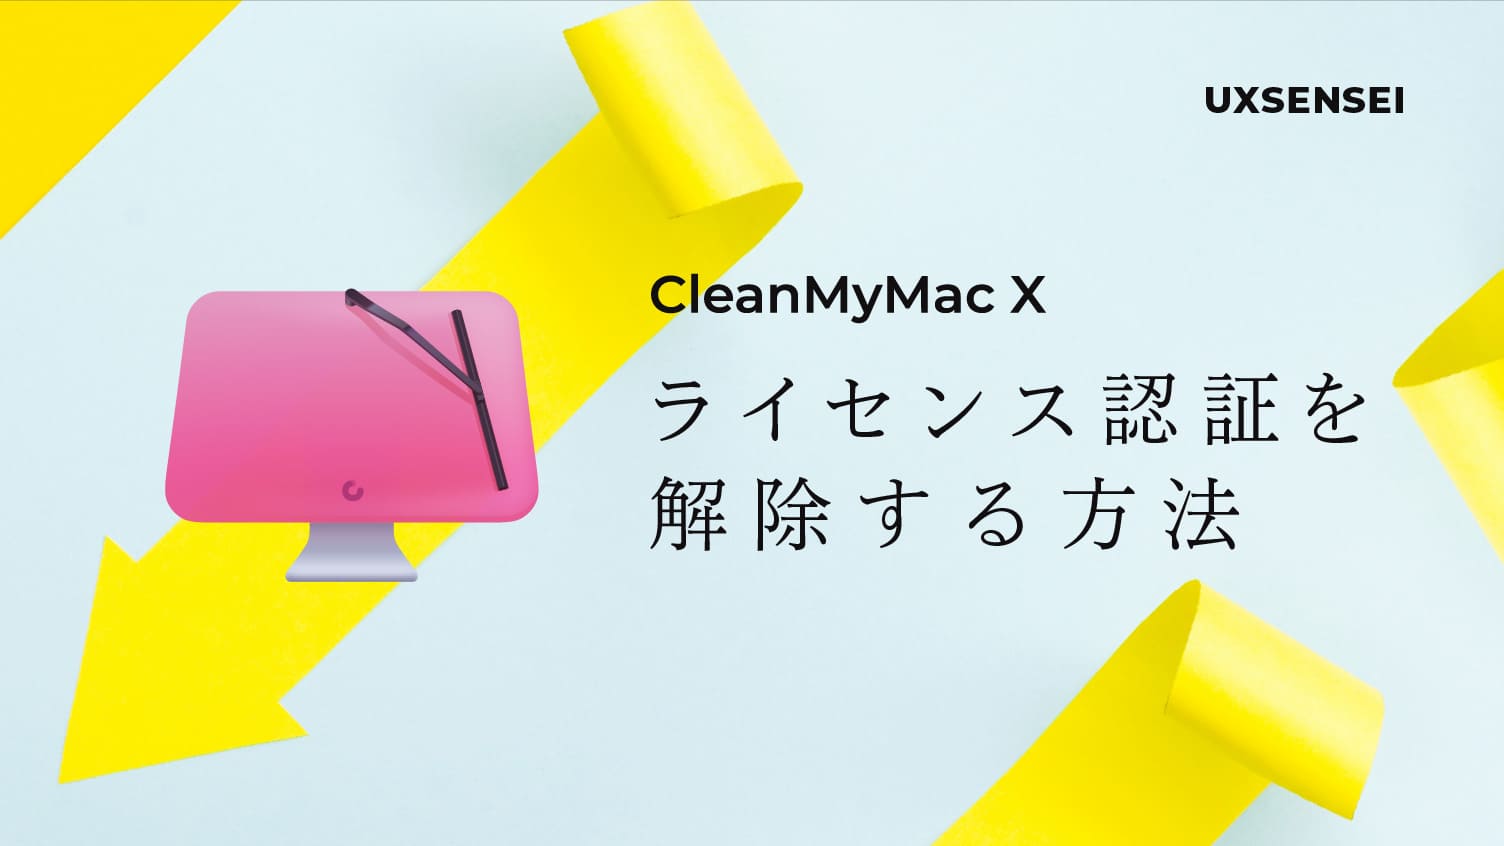 Mac故障！CleanMyMac X のライセンス認証の解除方法は？（リセット）